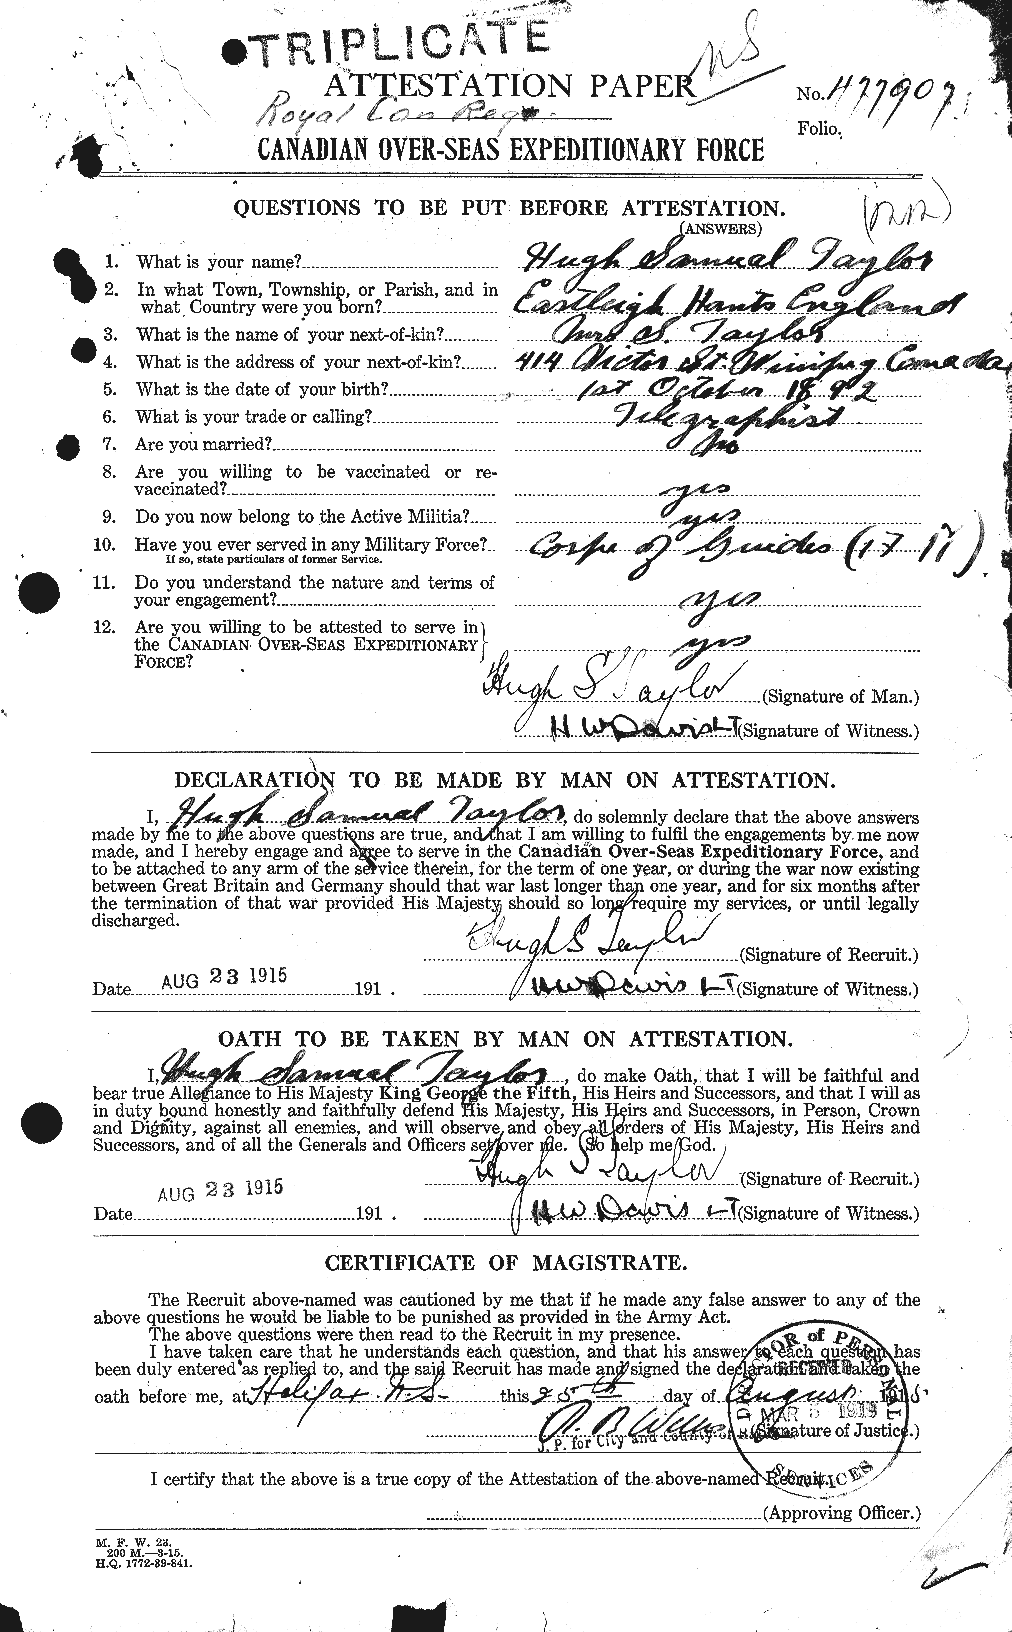 Personnel Records of the First World War - CEF 626621a